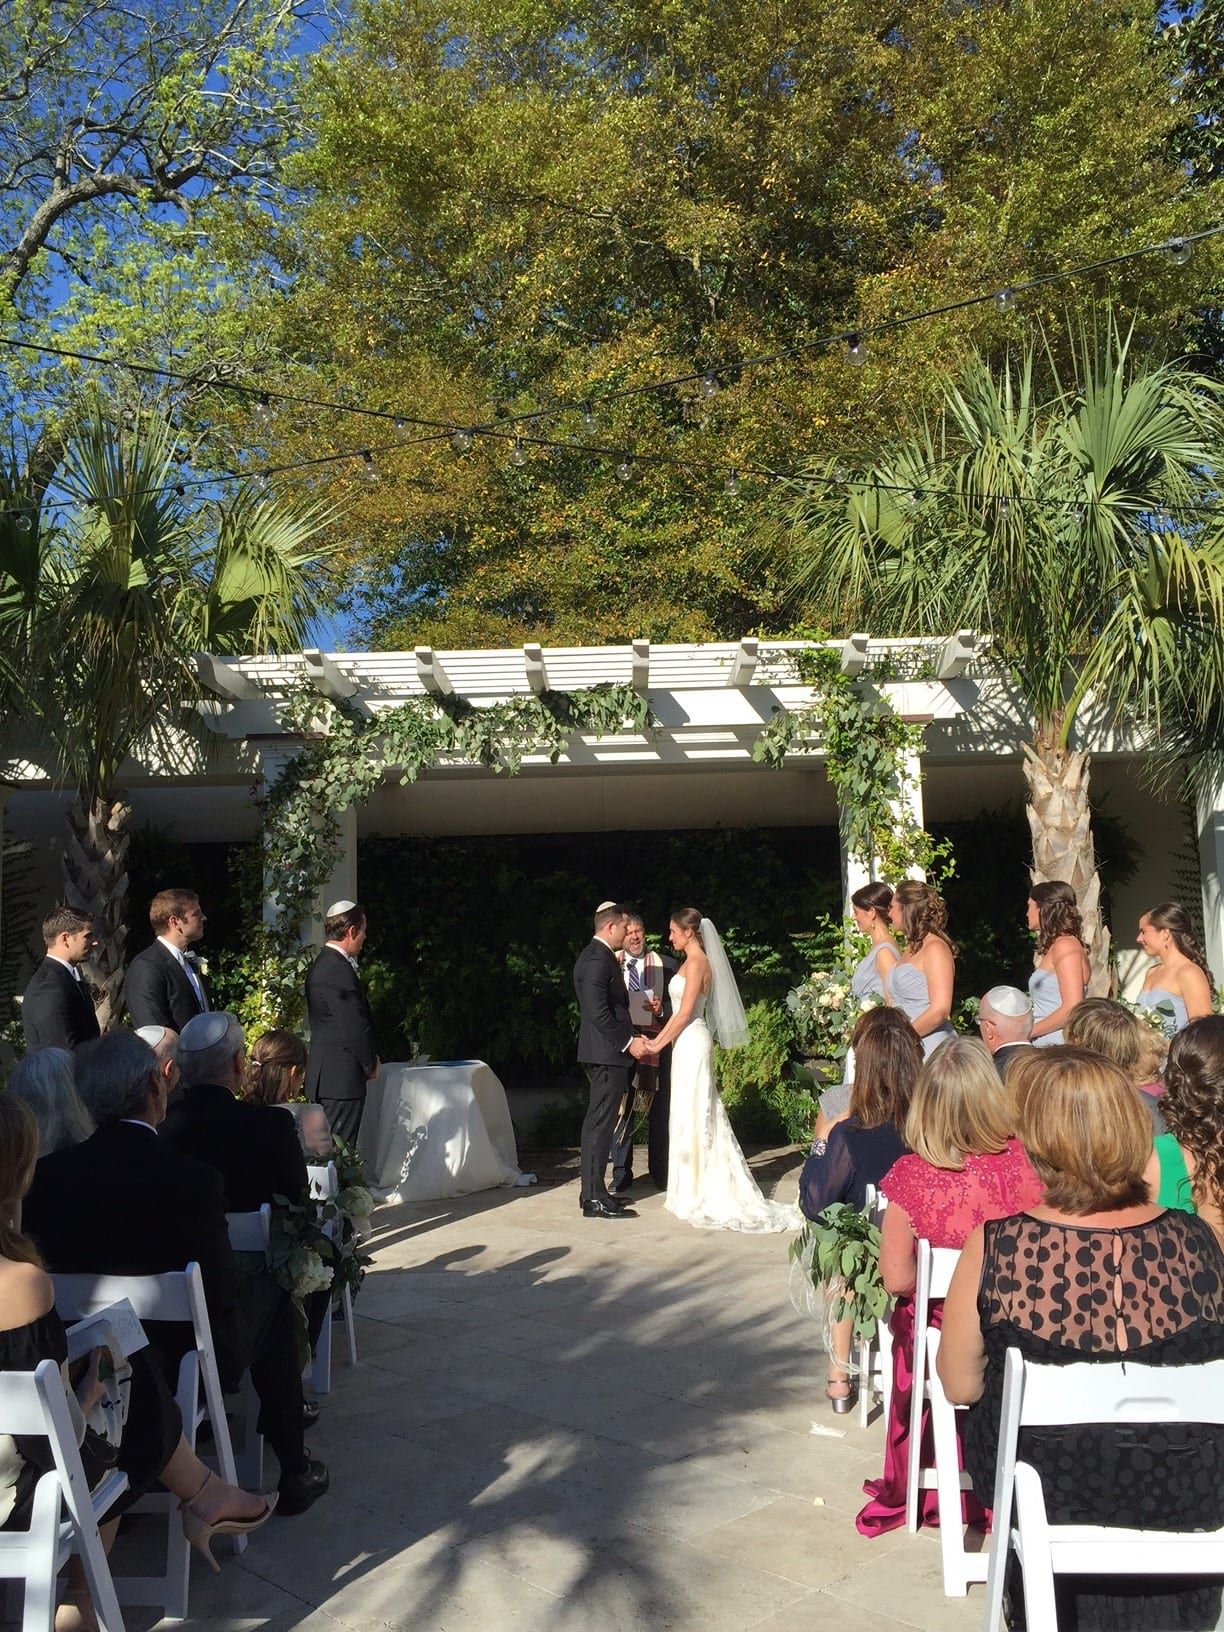 A cannon green wedding ceremony under a palm tree.